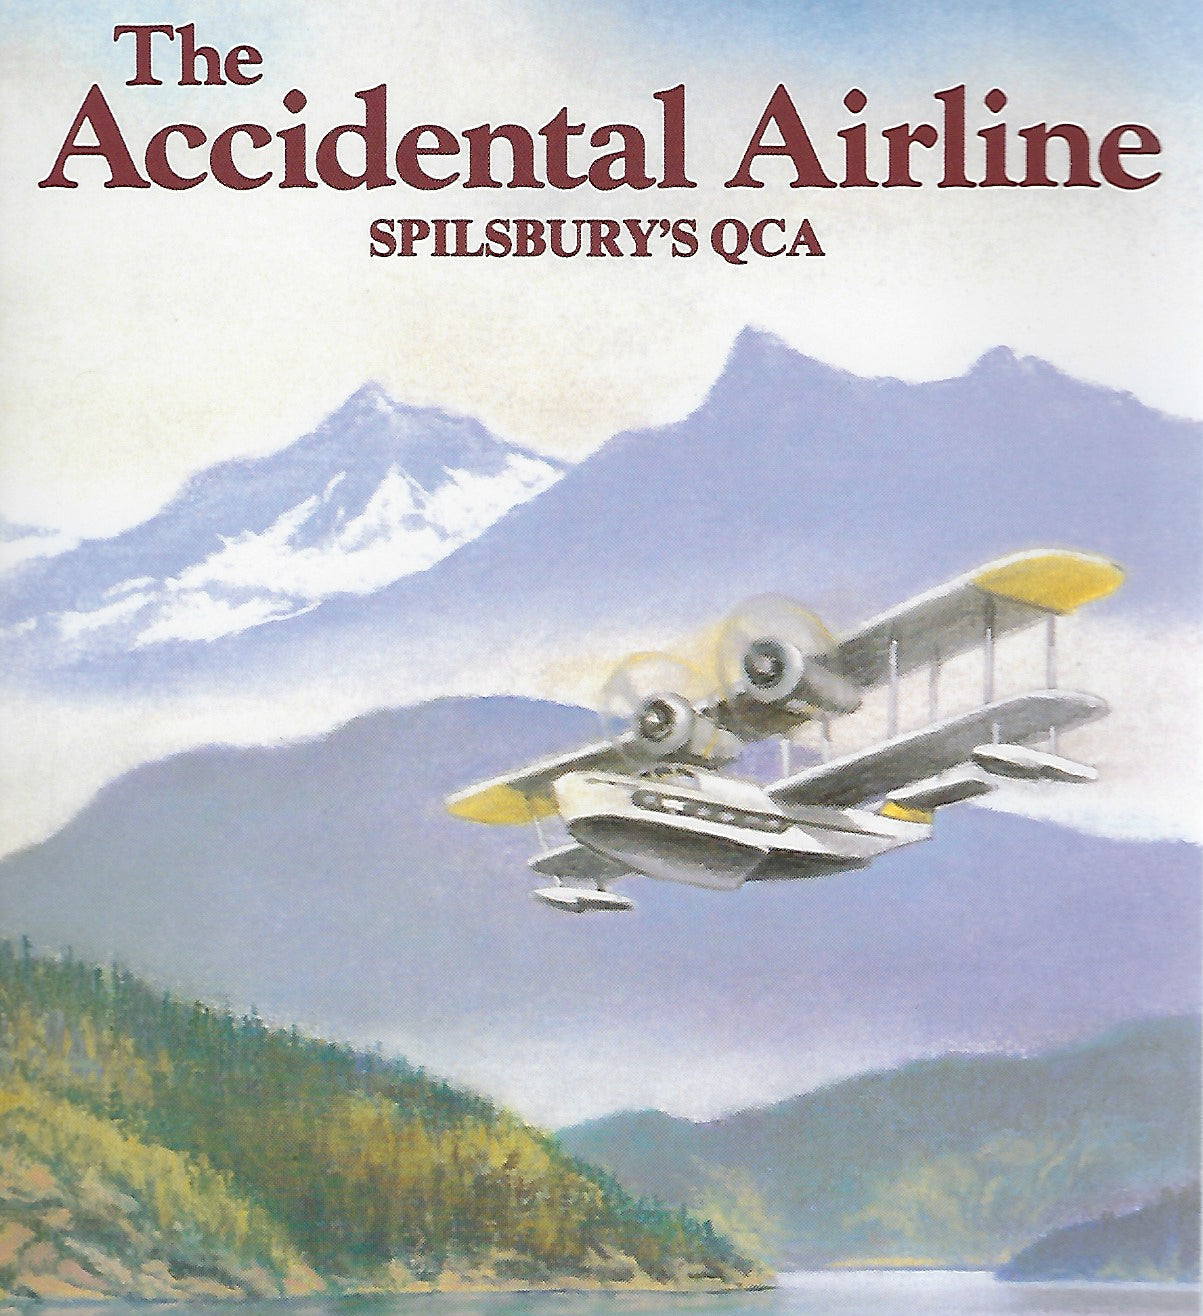 The Accidental Airline - Spilsbury's QCA (by Howard White and Jim Spilsbury)